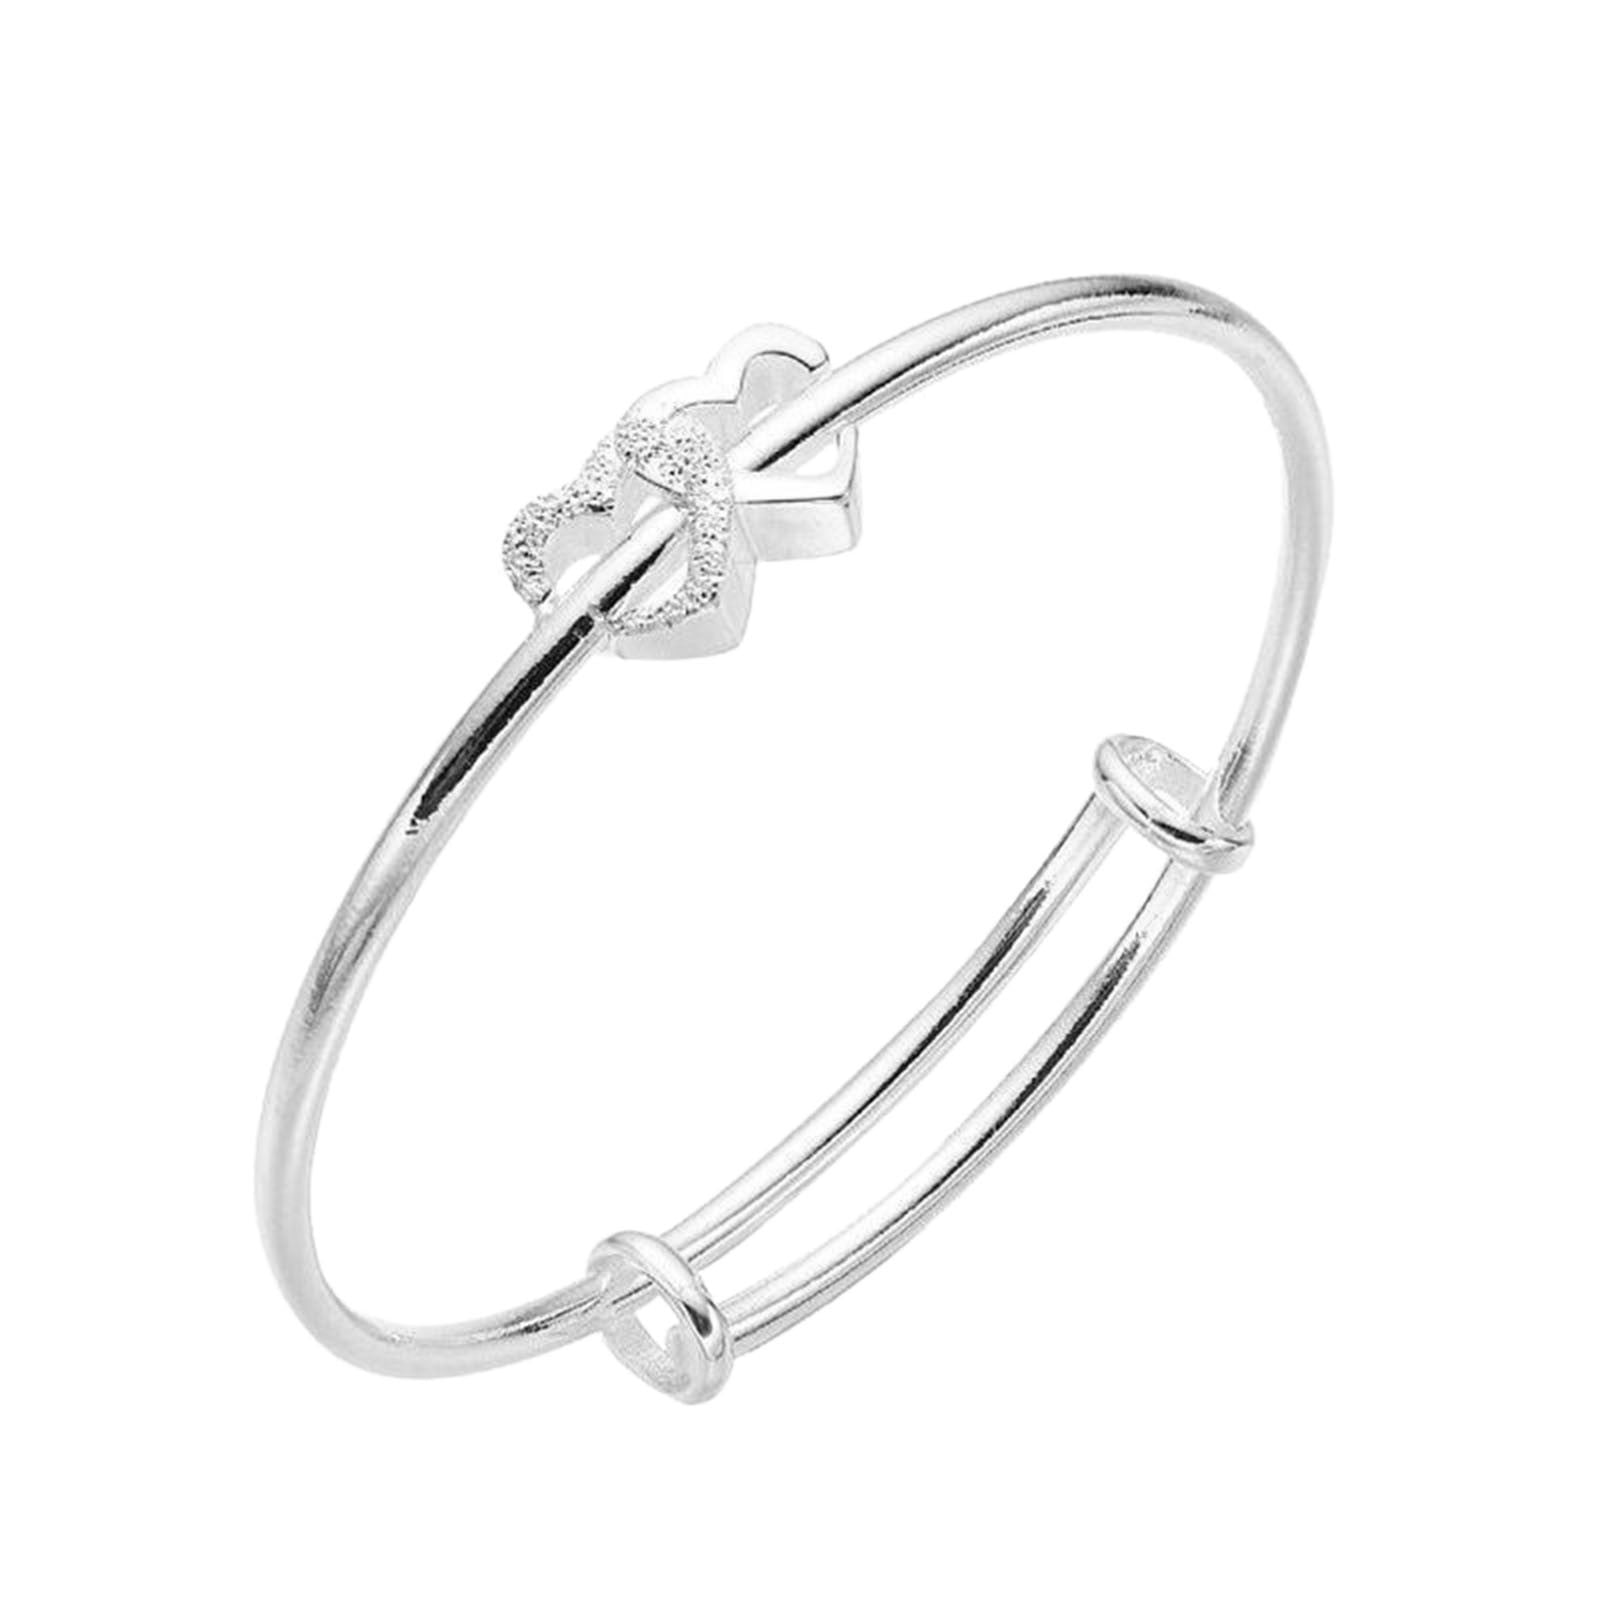 Nilu's Collection 925 Sterling Silver Hanging Heart Charm Bracelet for